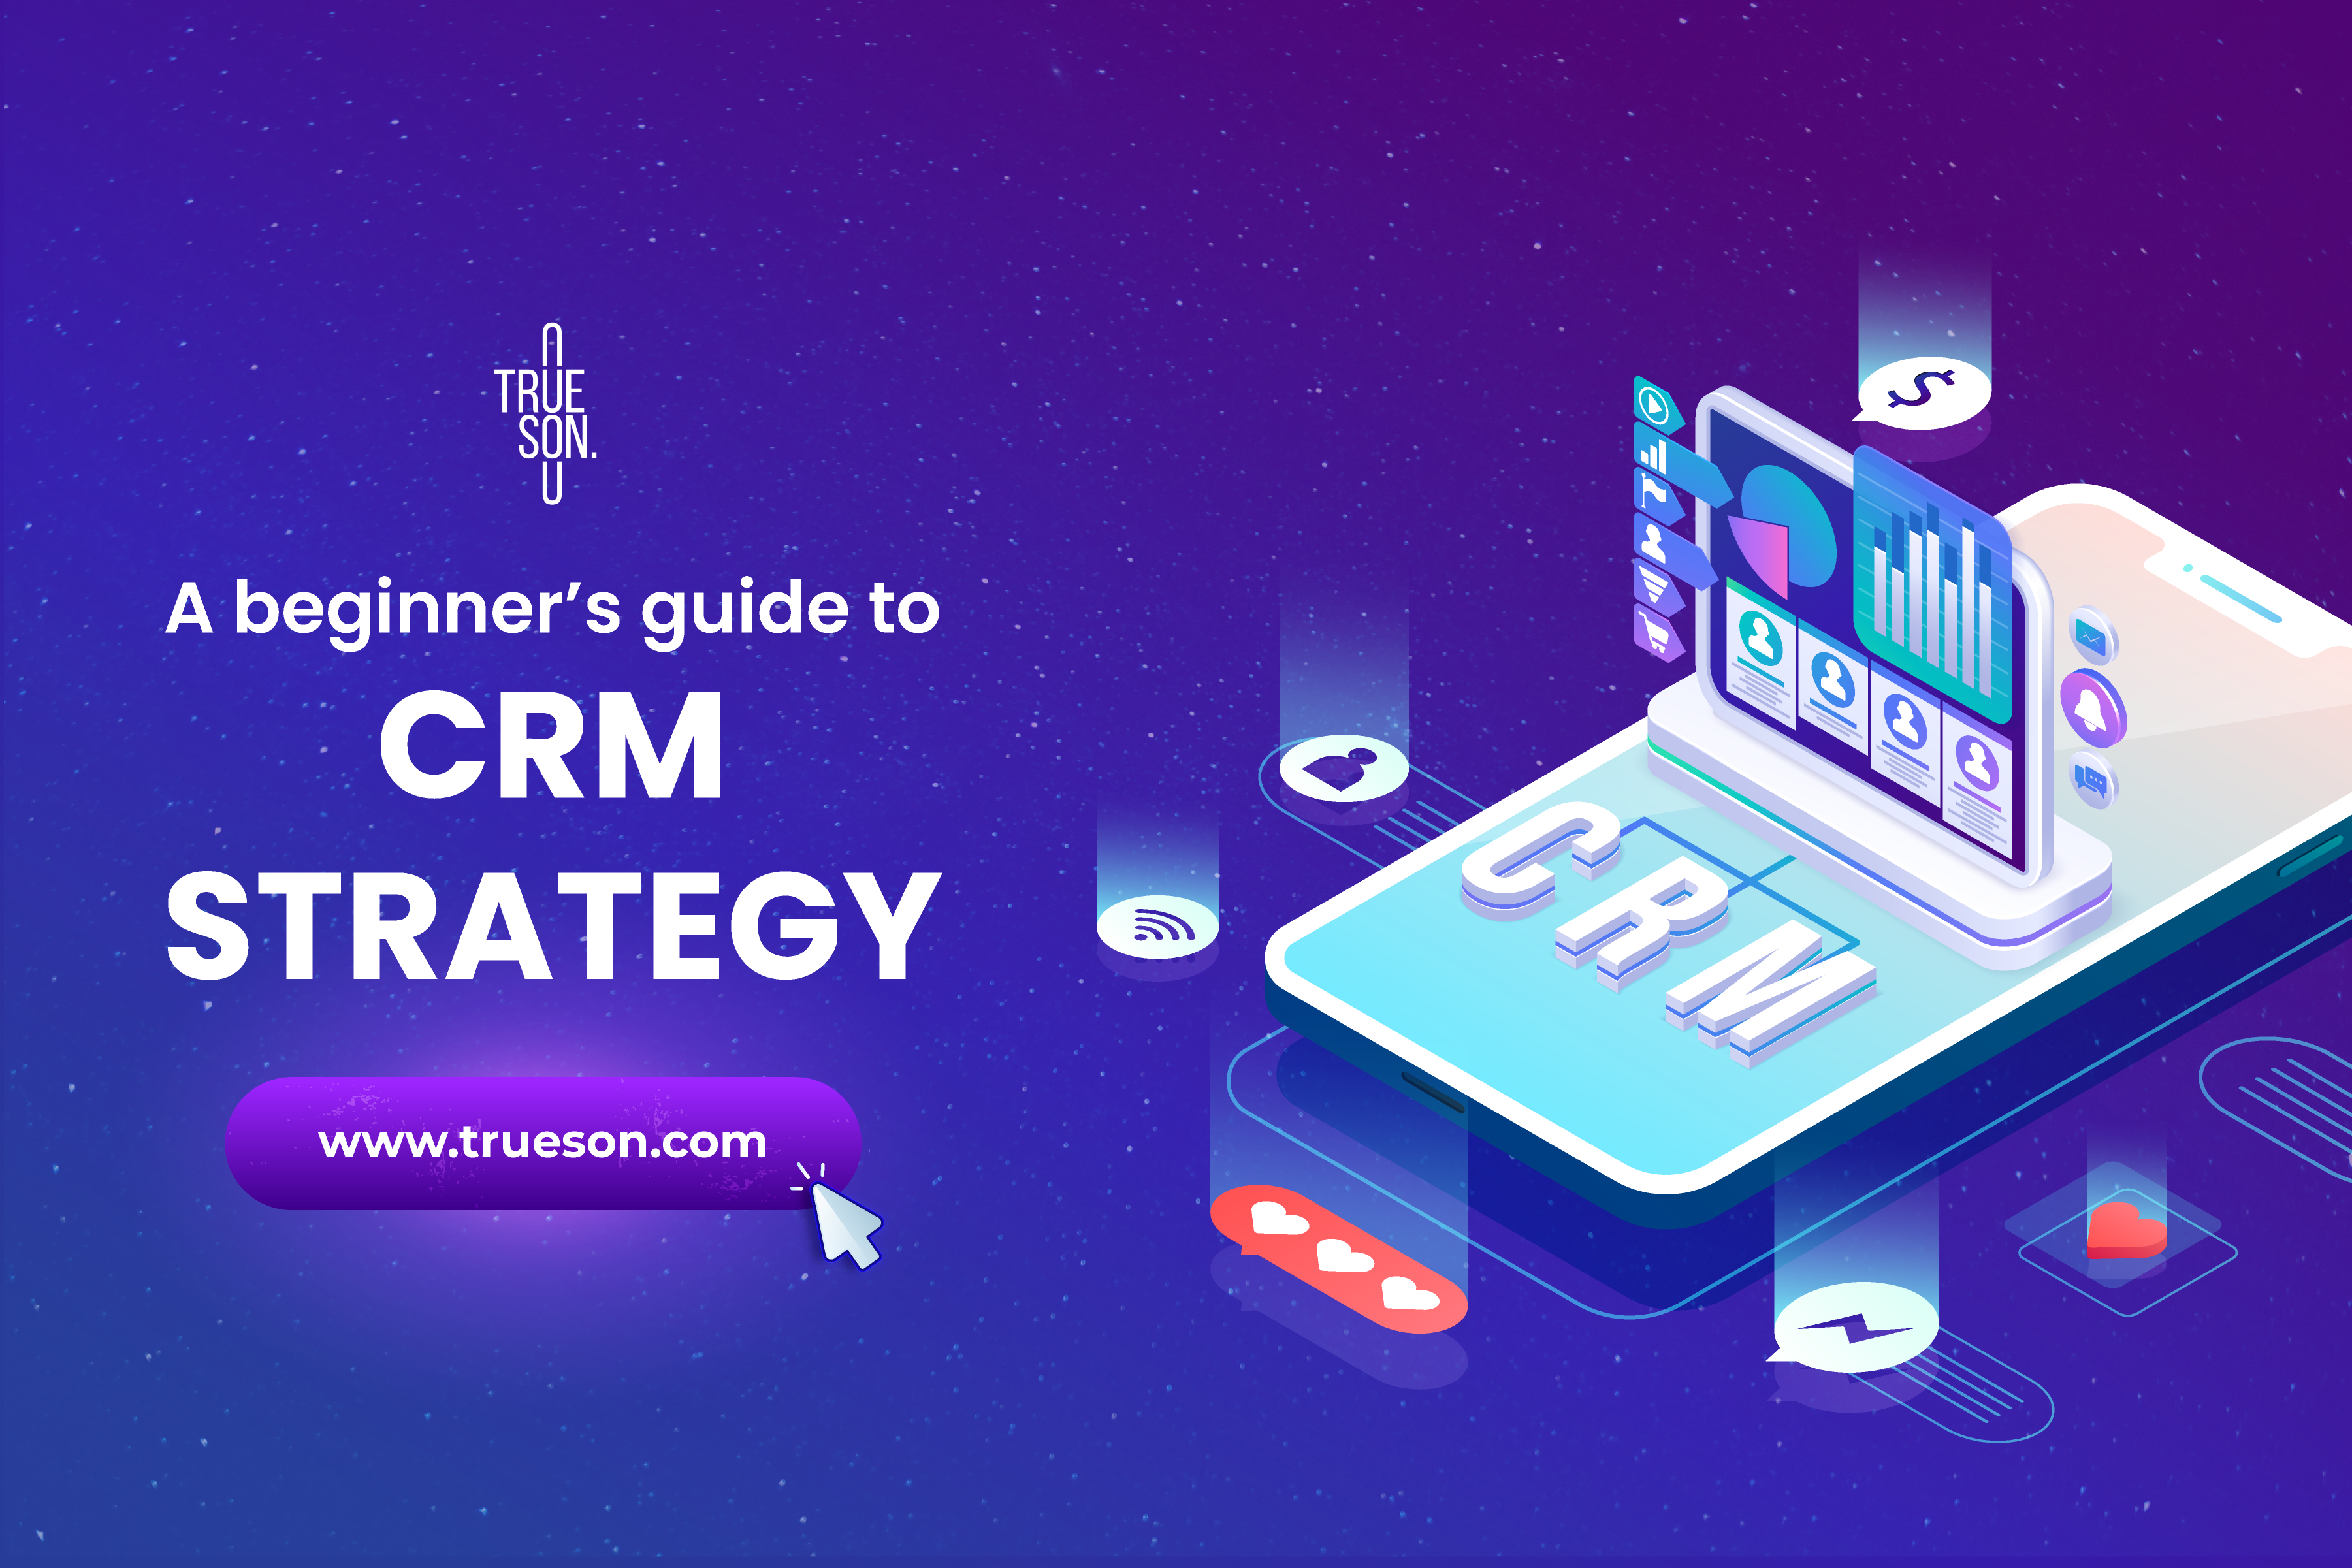 CRM Strategy with Trueson